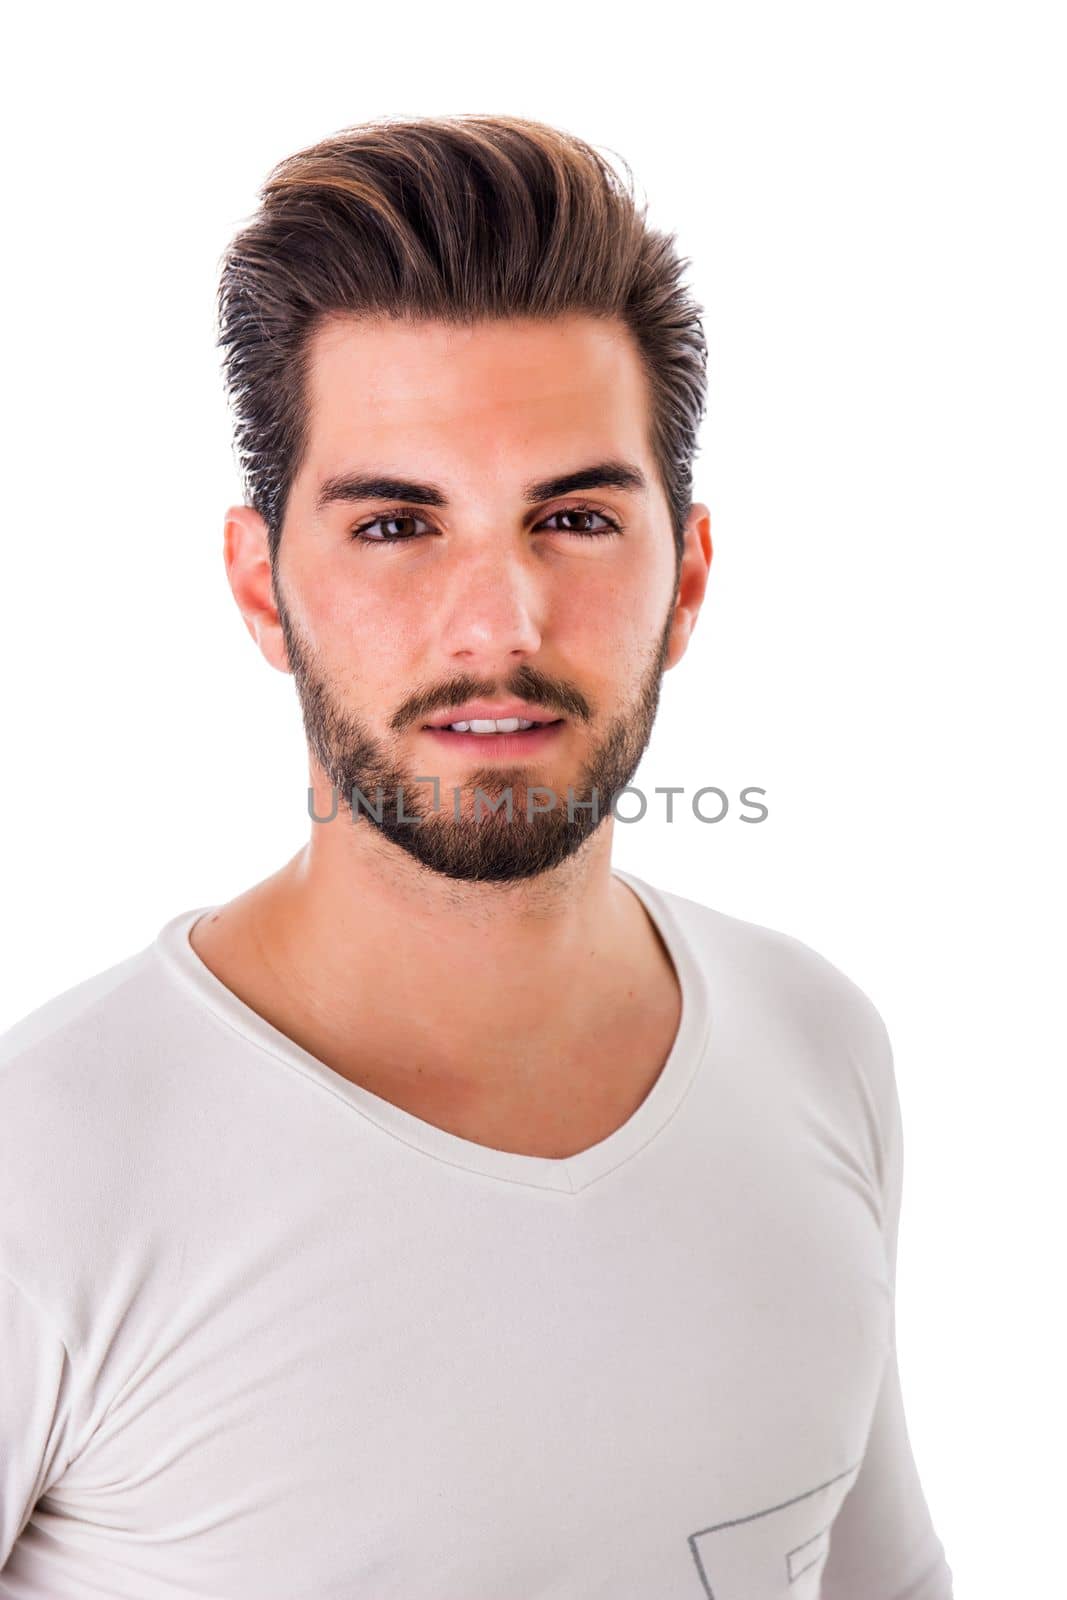 Handsome young man standing with white shirt, half length body shot, isolated